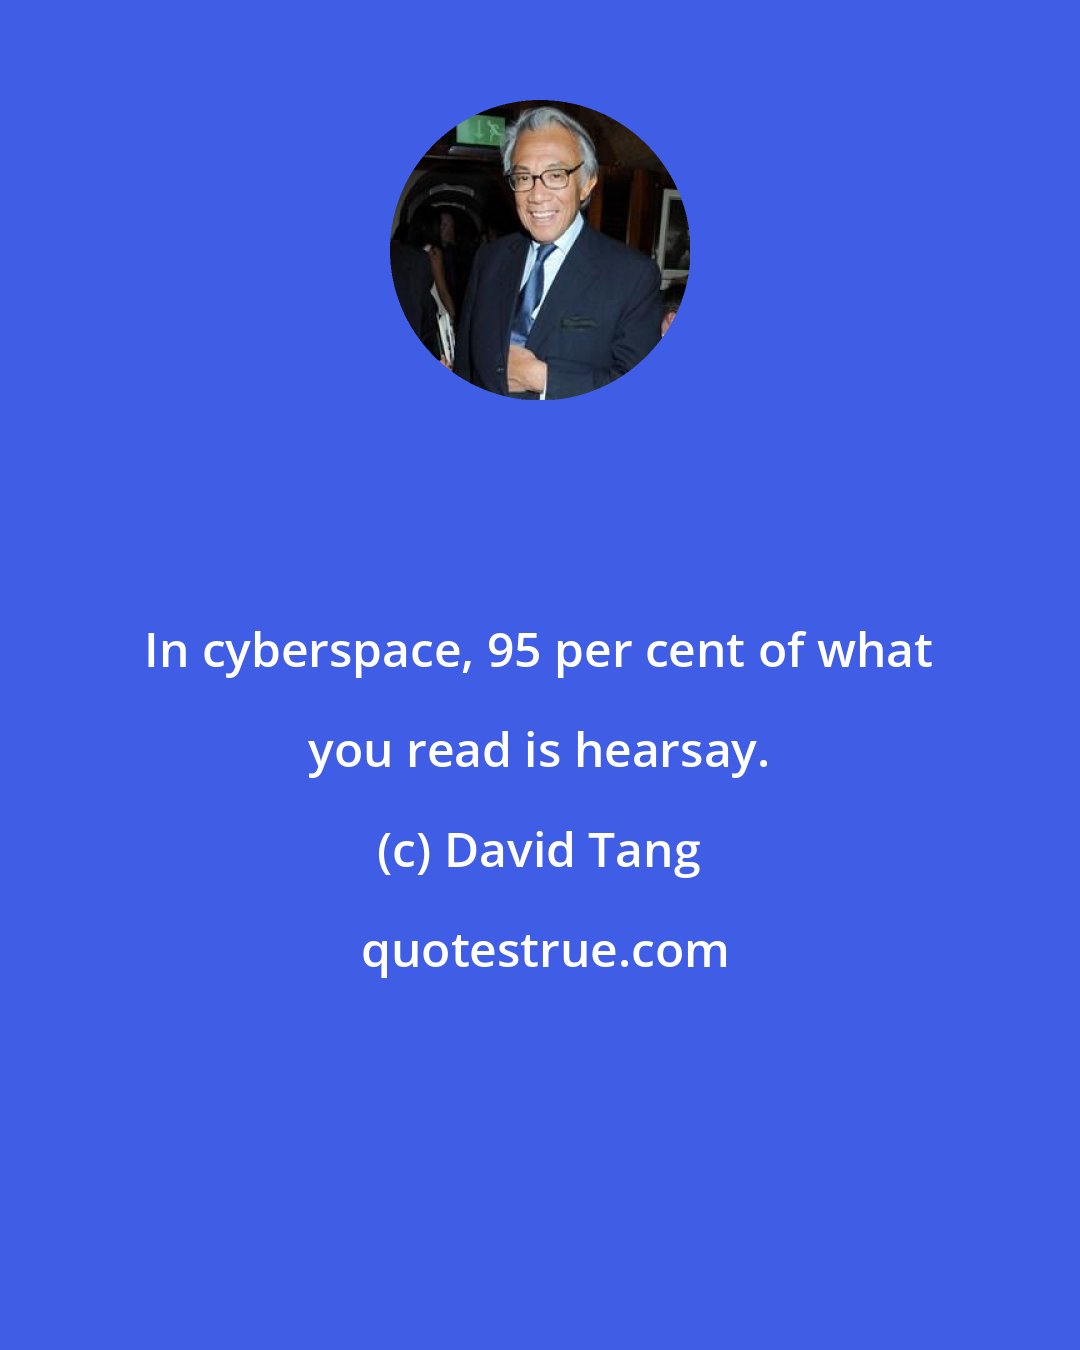 David Tang: In cyberspace, 95 per cent of what you read is hearsay.